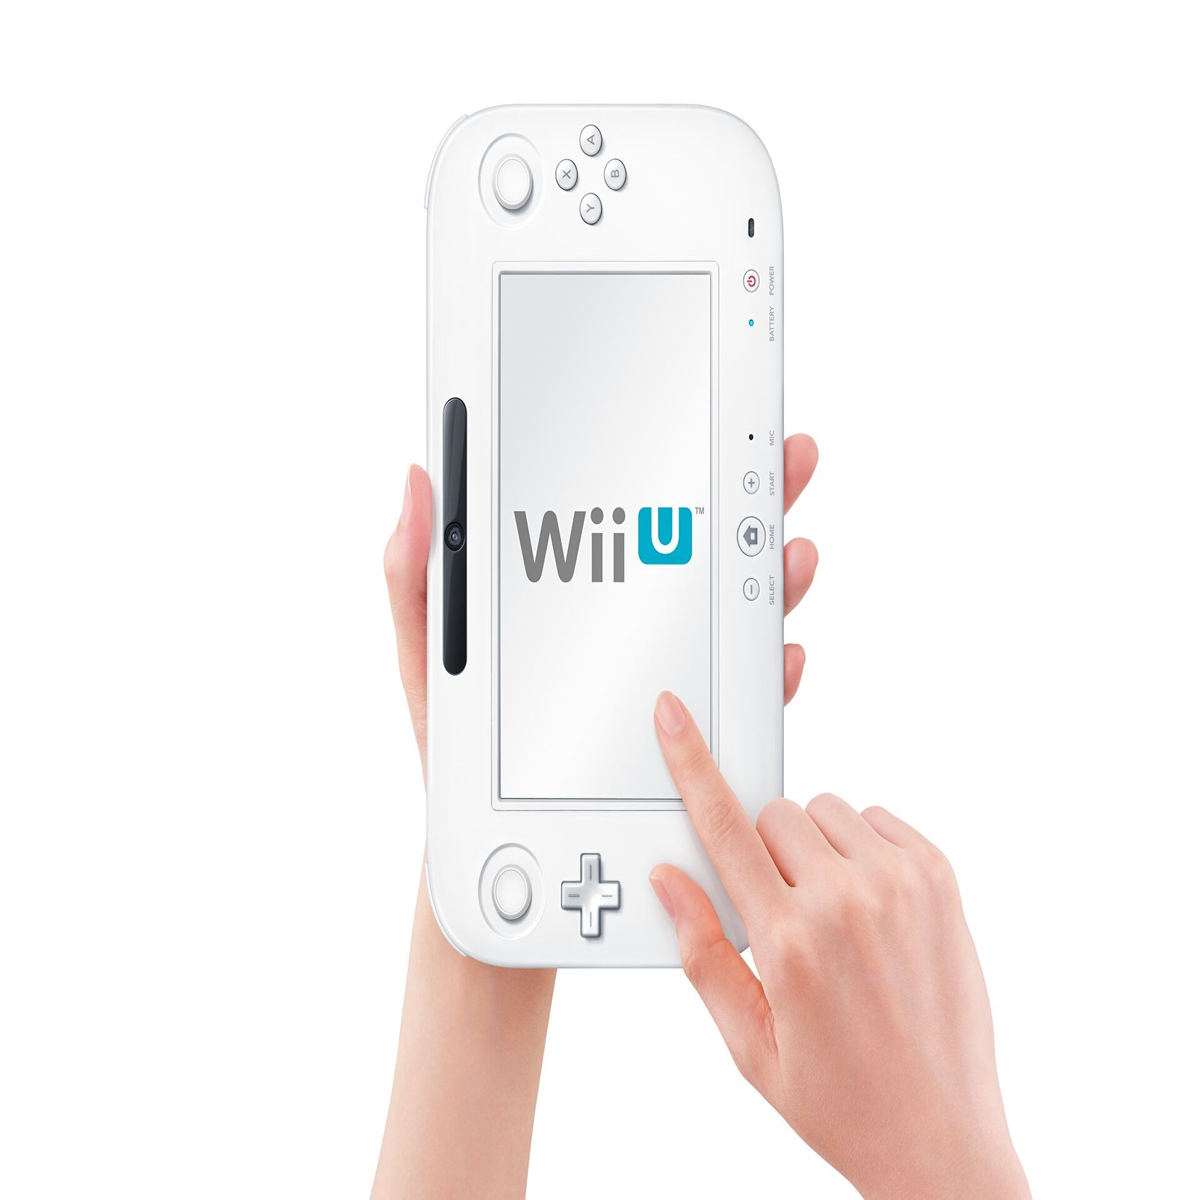 Nintendo: Wii U GamePad Is The Only Real Innovation This Console Cycle, But  We Didn't Showcase It Well Enough